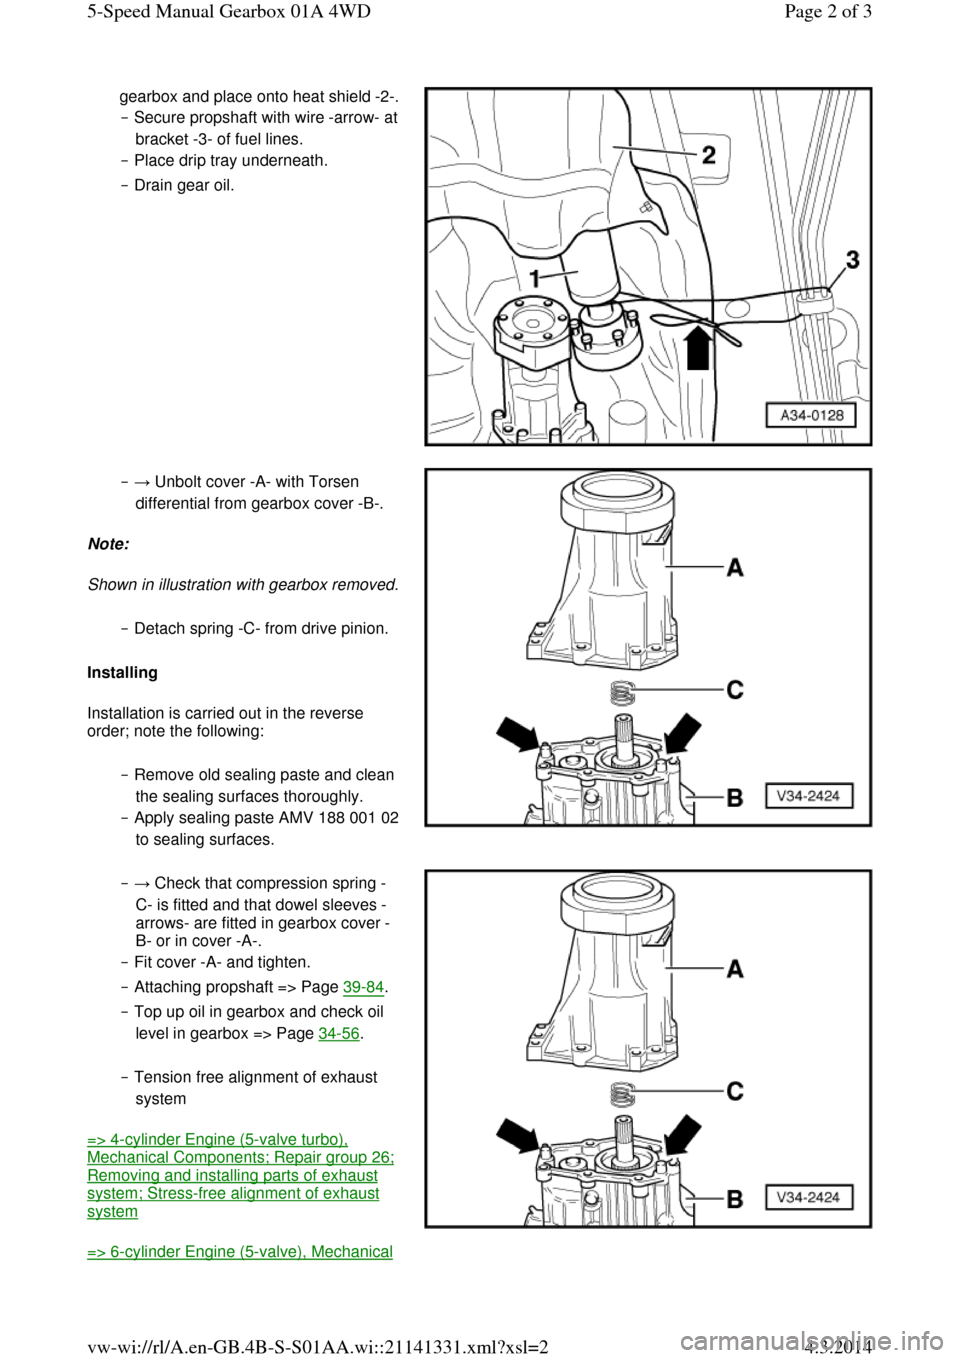 AUDI A6 2000 C5 / 2.G Changing Clutch 5Speed Manual Gearbox gearbox and place onto heat shield -2-. ‒ Secure propshaft with wire -arrow- at bracket -3- of fuel lines.  
‒ Place drip tray underneath.  
‒ Drain gear oil.   ‒ → Unbolt cover -A- with Tor